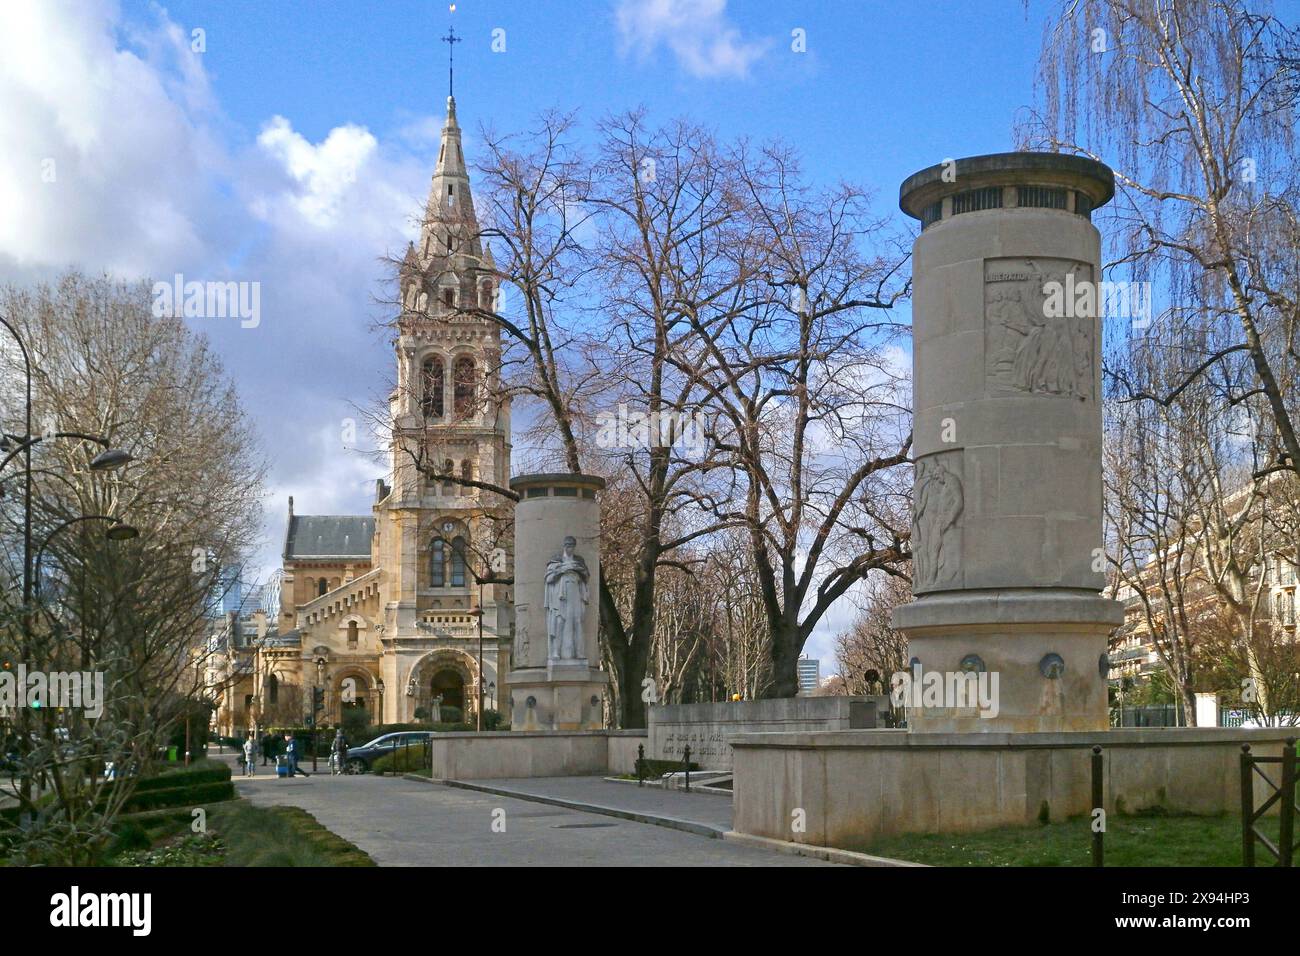 Neuilly-sur-Seine, France - February 12 2018: War memorial created by Louis LEFORT. It is located on place Winston Churchill in front of St. Peter's C Stock Photo